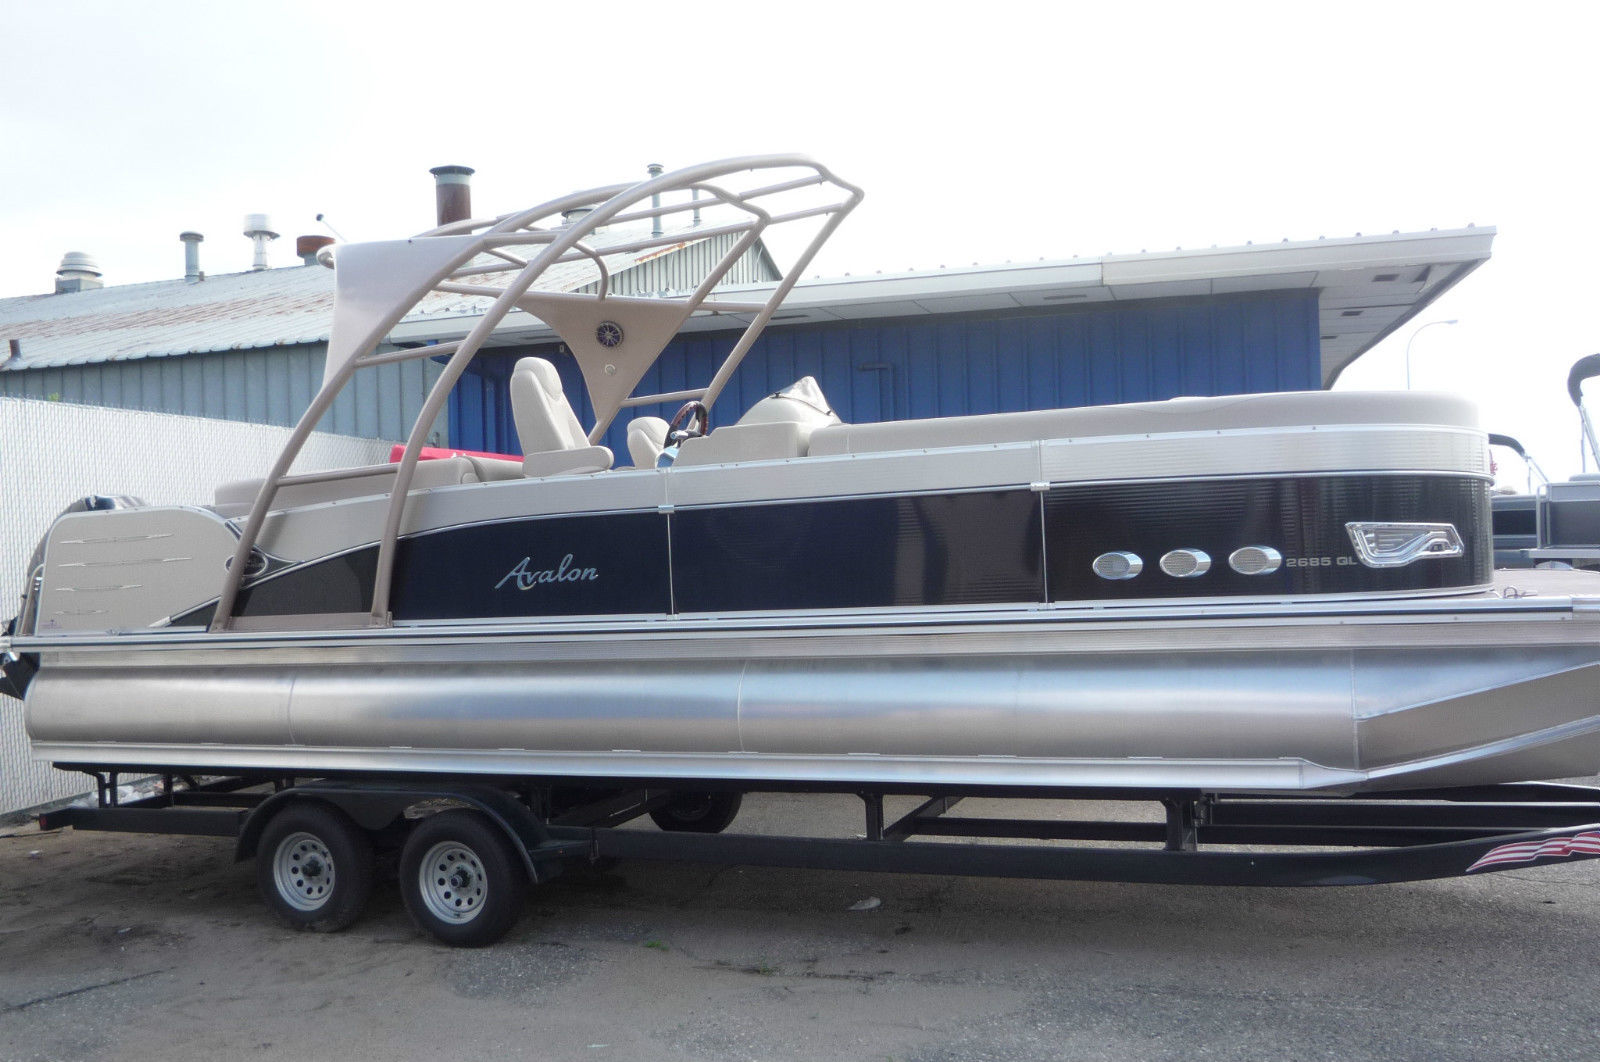 AVALON 26 QUAD LOUNGER boat for sale from USA